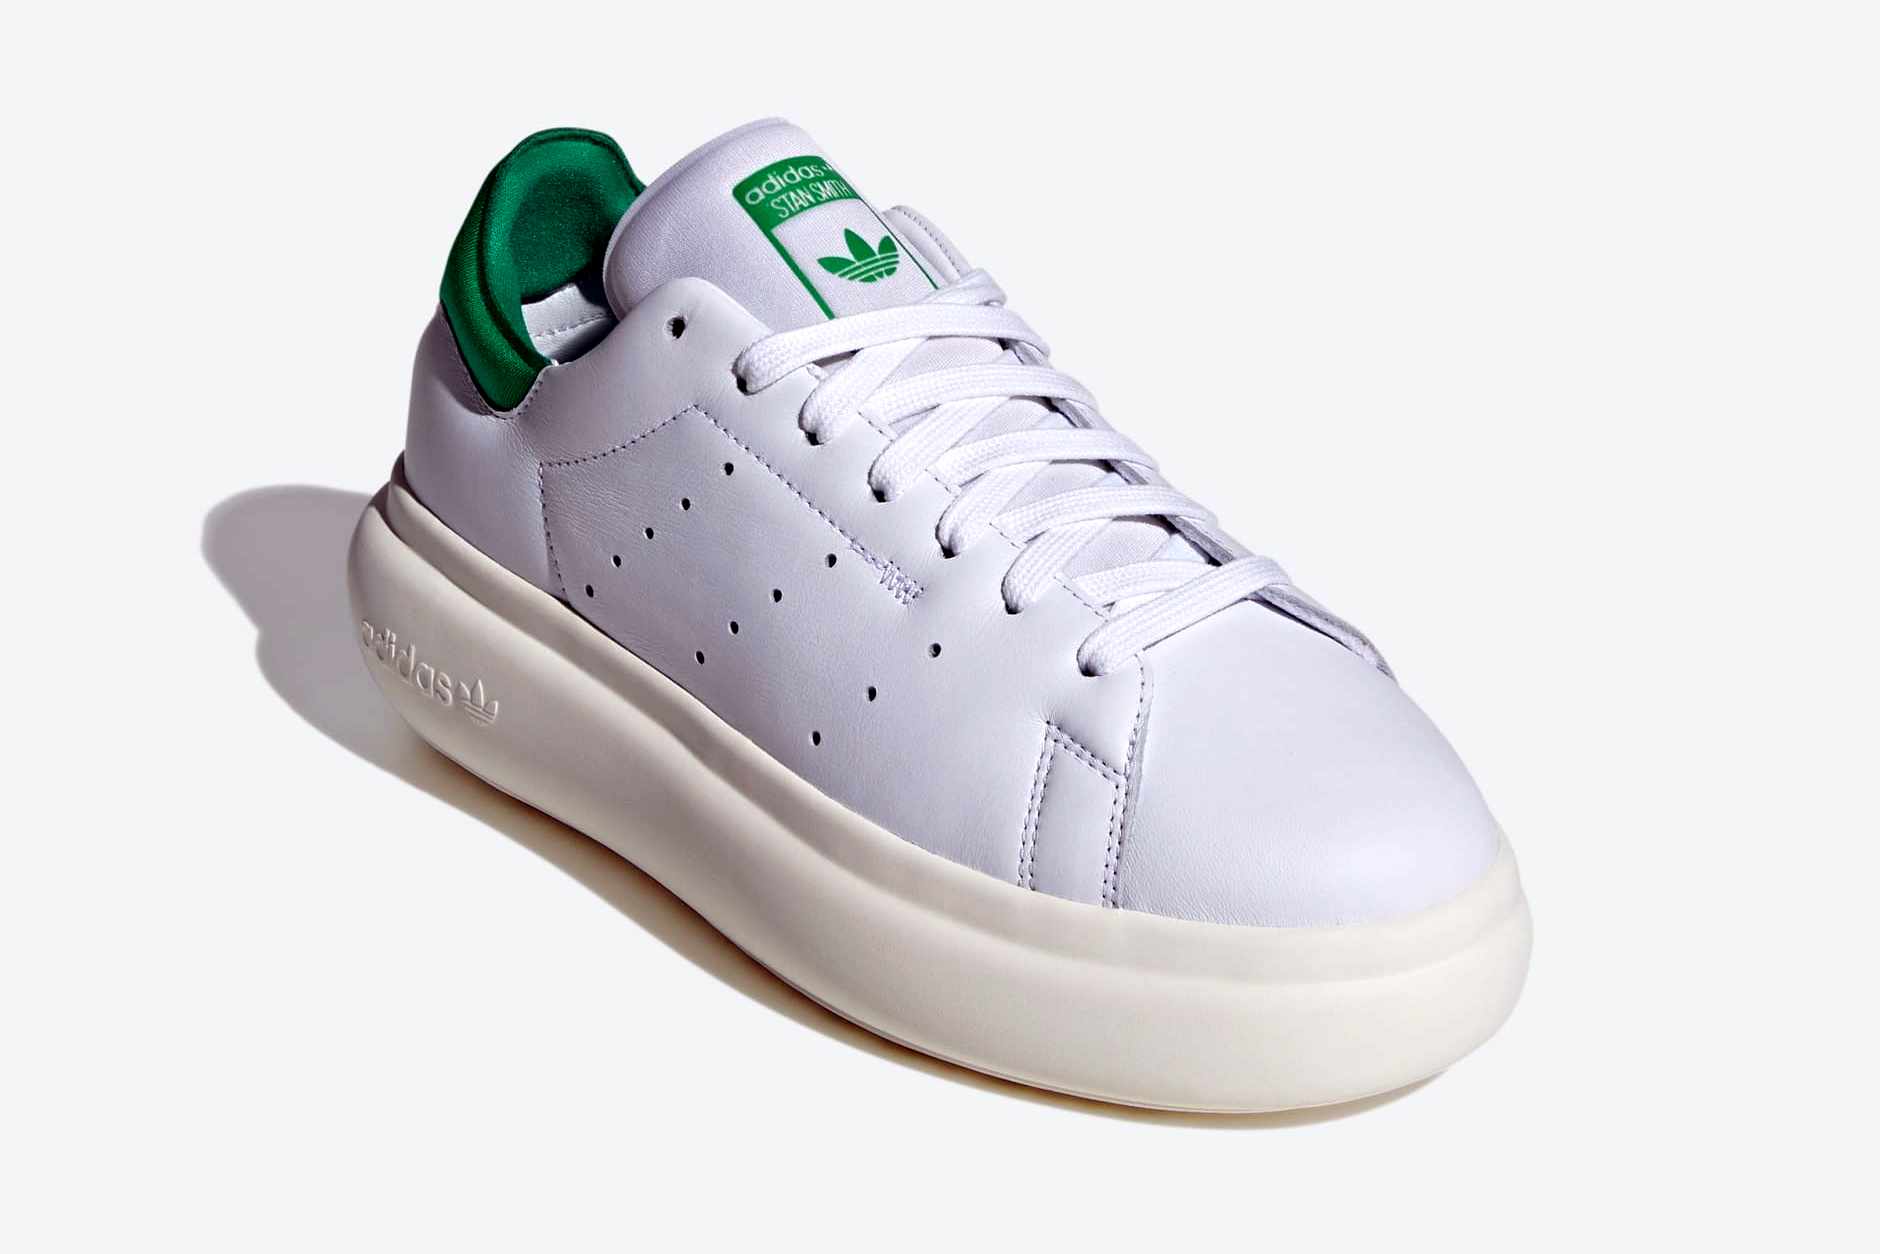 adidas' platform stan smith sneaker in white and green leather